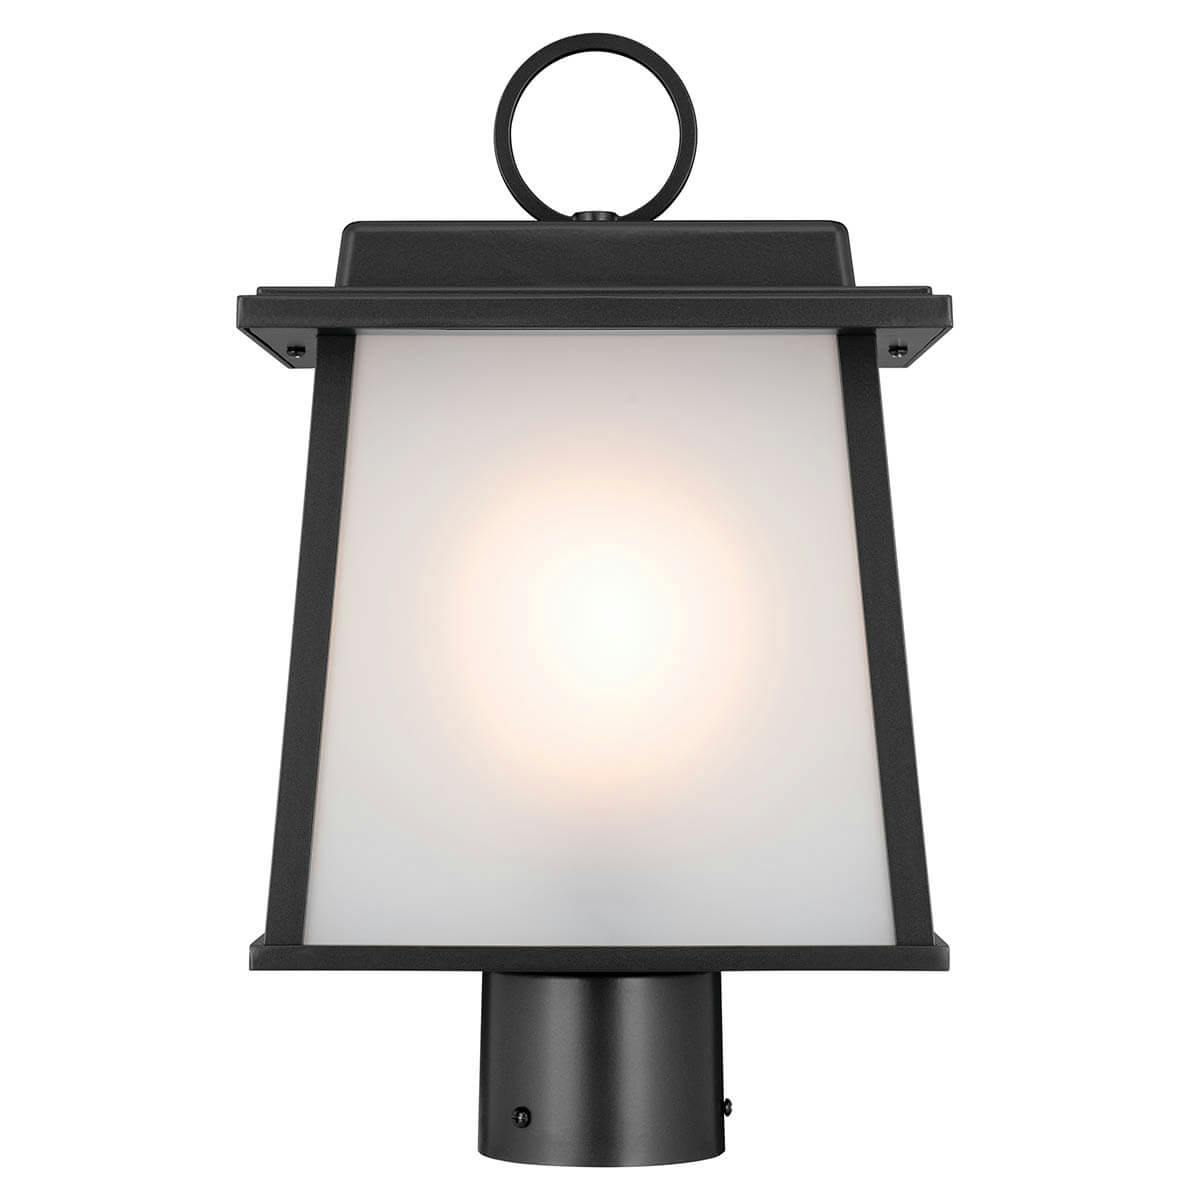 Front view of the Noward 7.5" 1 Light Post Lantern Black on a white background